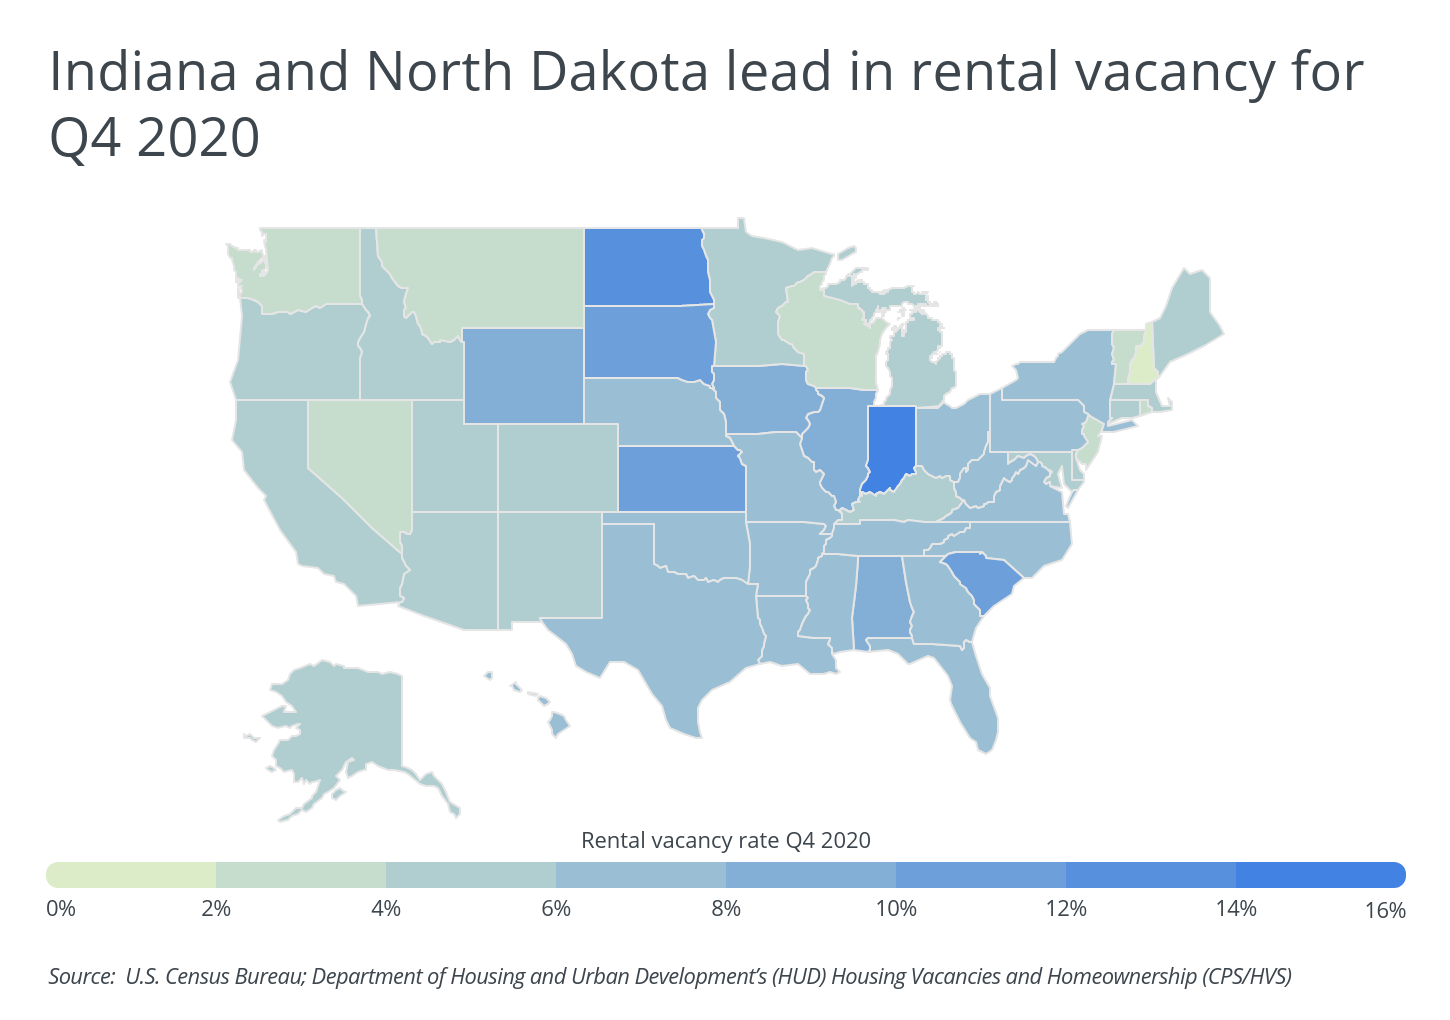 Indiana and North Dakota lead in rental vacancy for Q4 2020